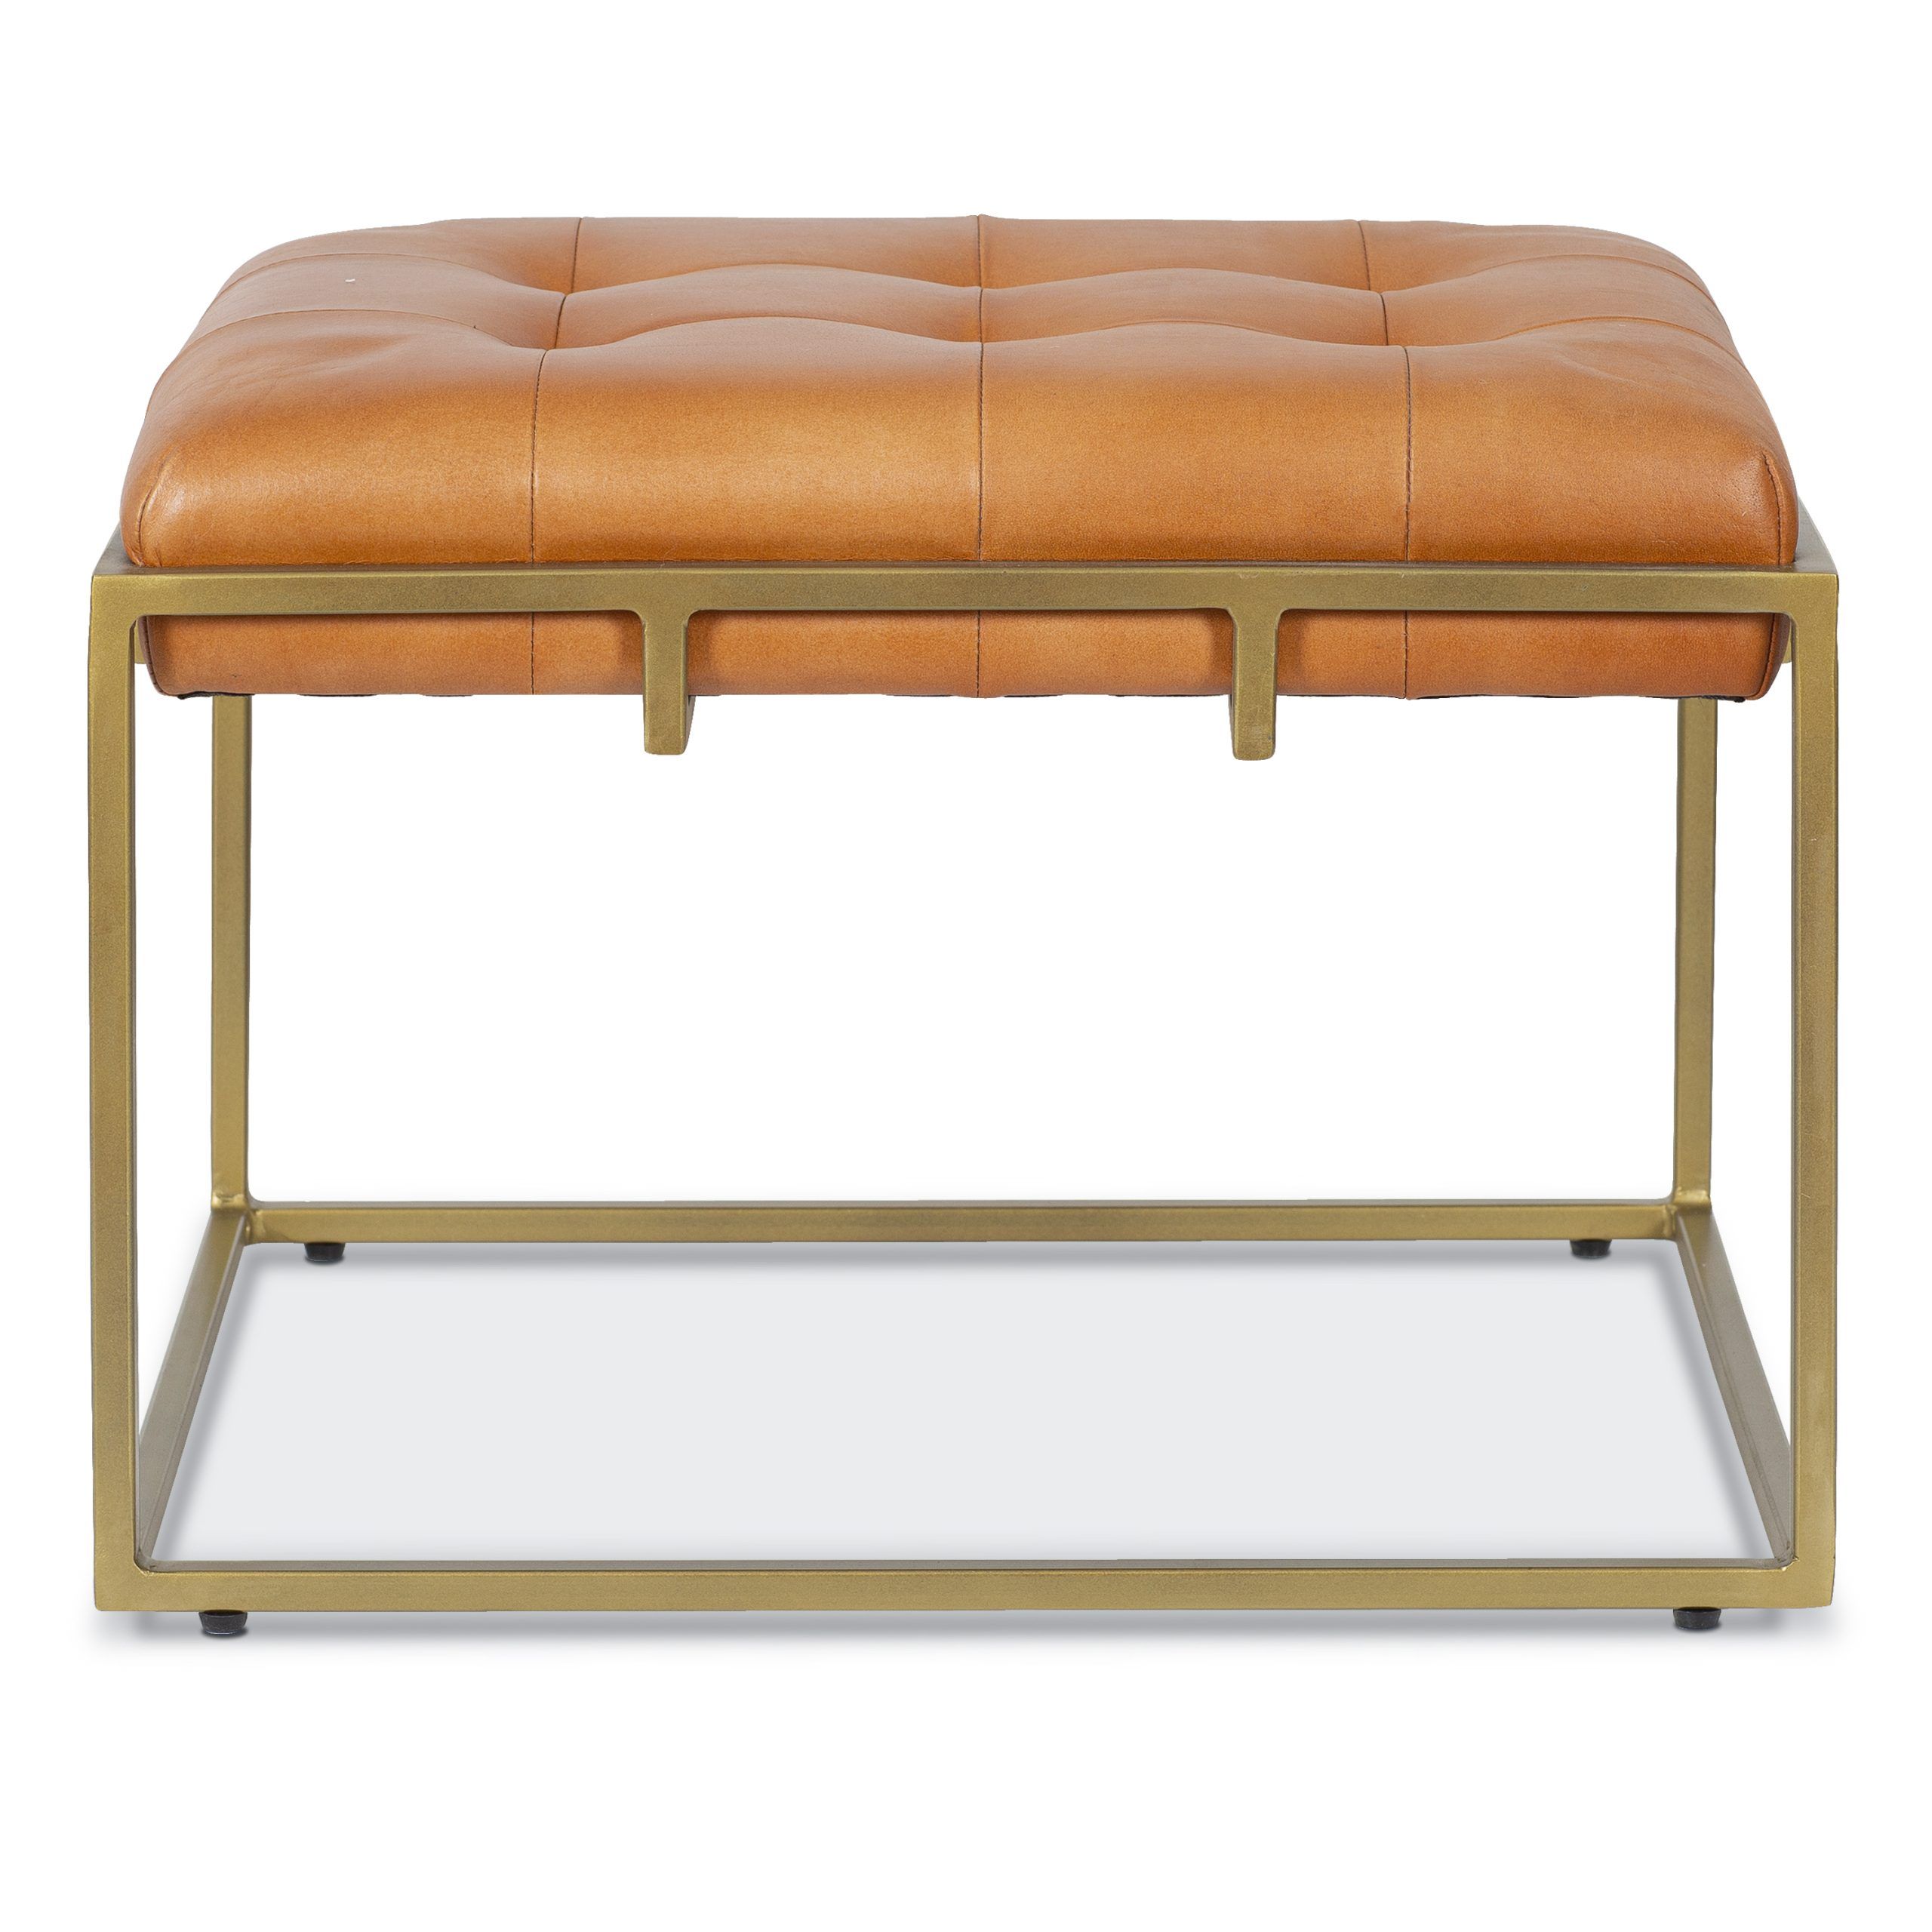 Edgemod Curio 23" Ottoman In Saddle Leather And Antique Brass Legs –  Walmart With Regard To Antique Brass Ottomans (View 11 of 15)